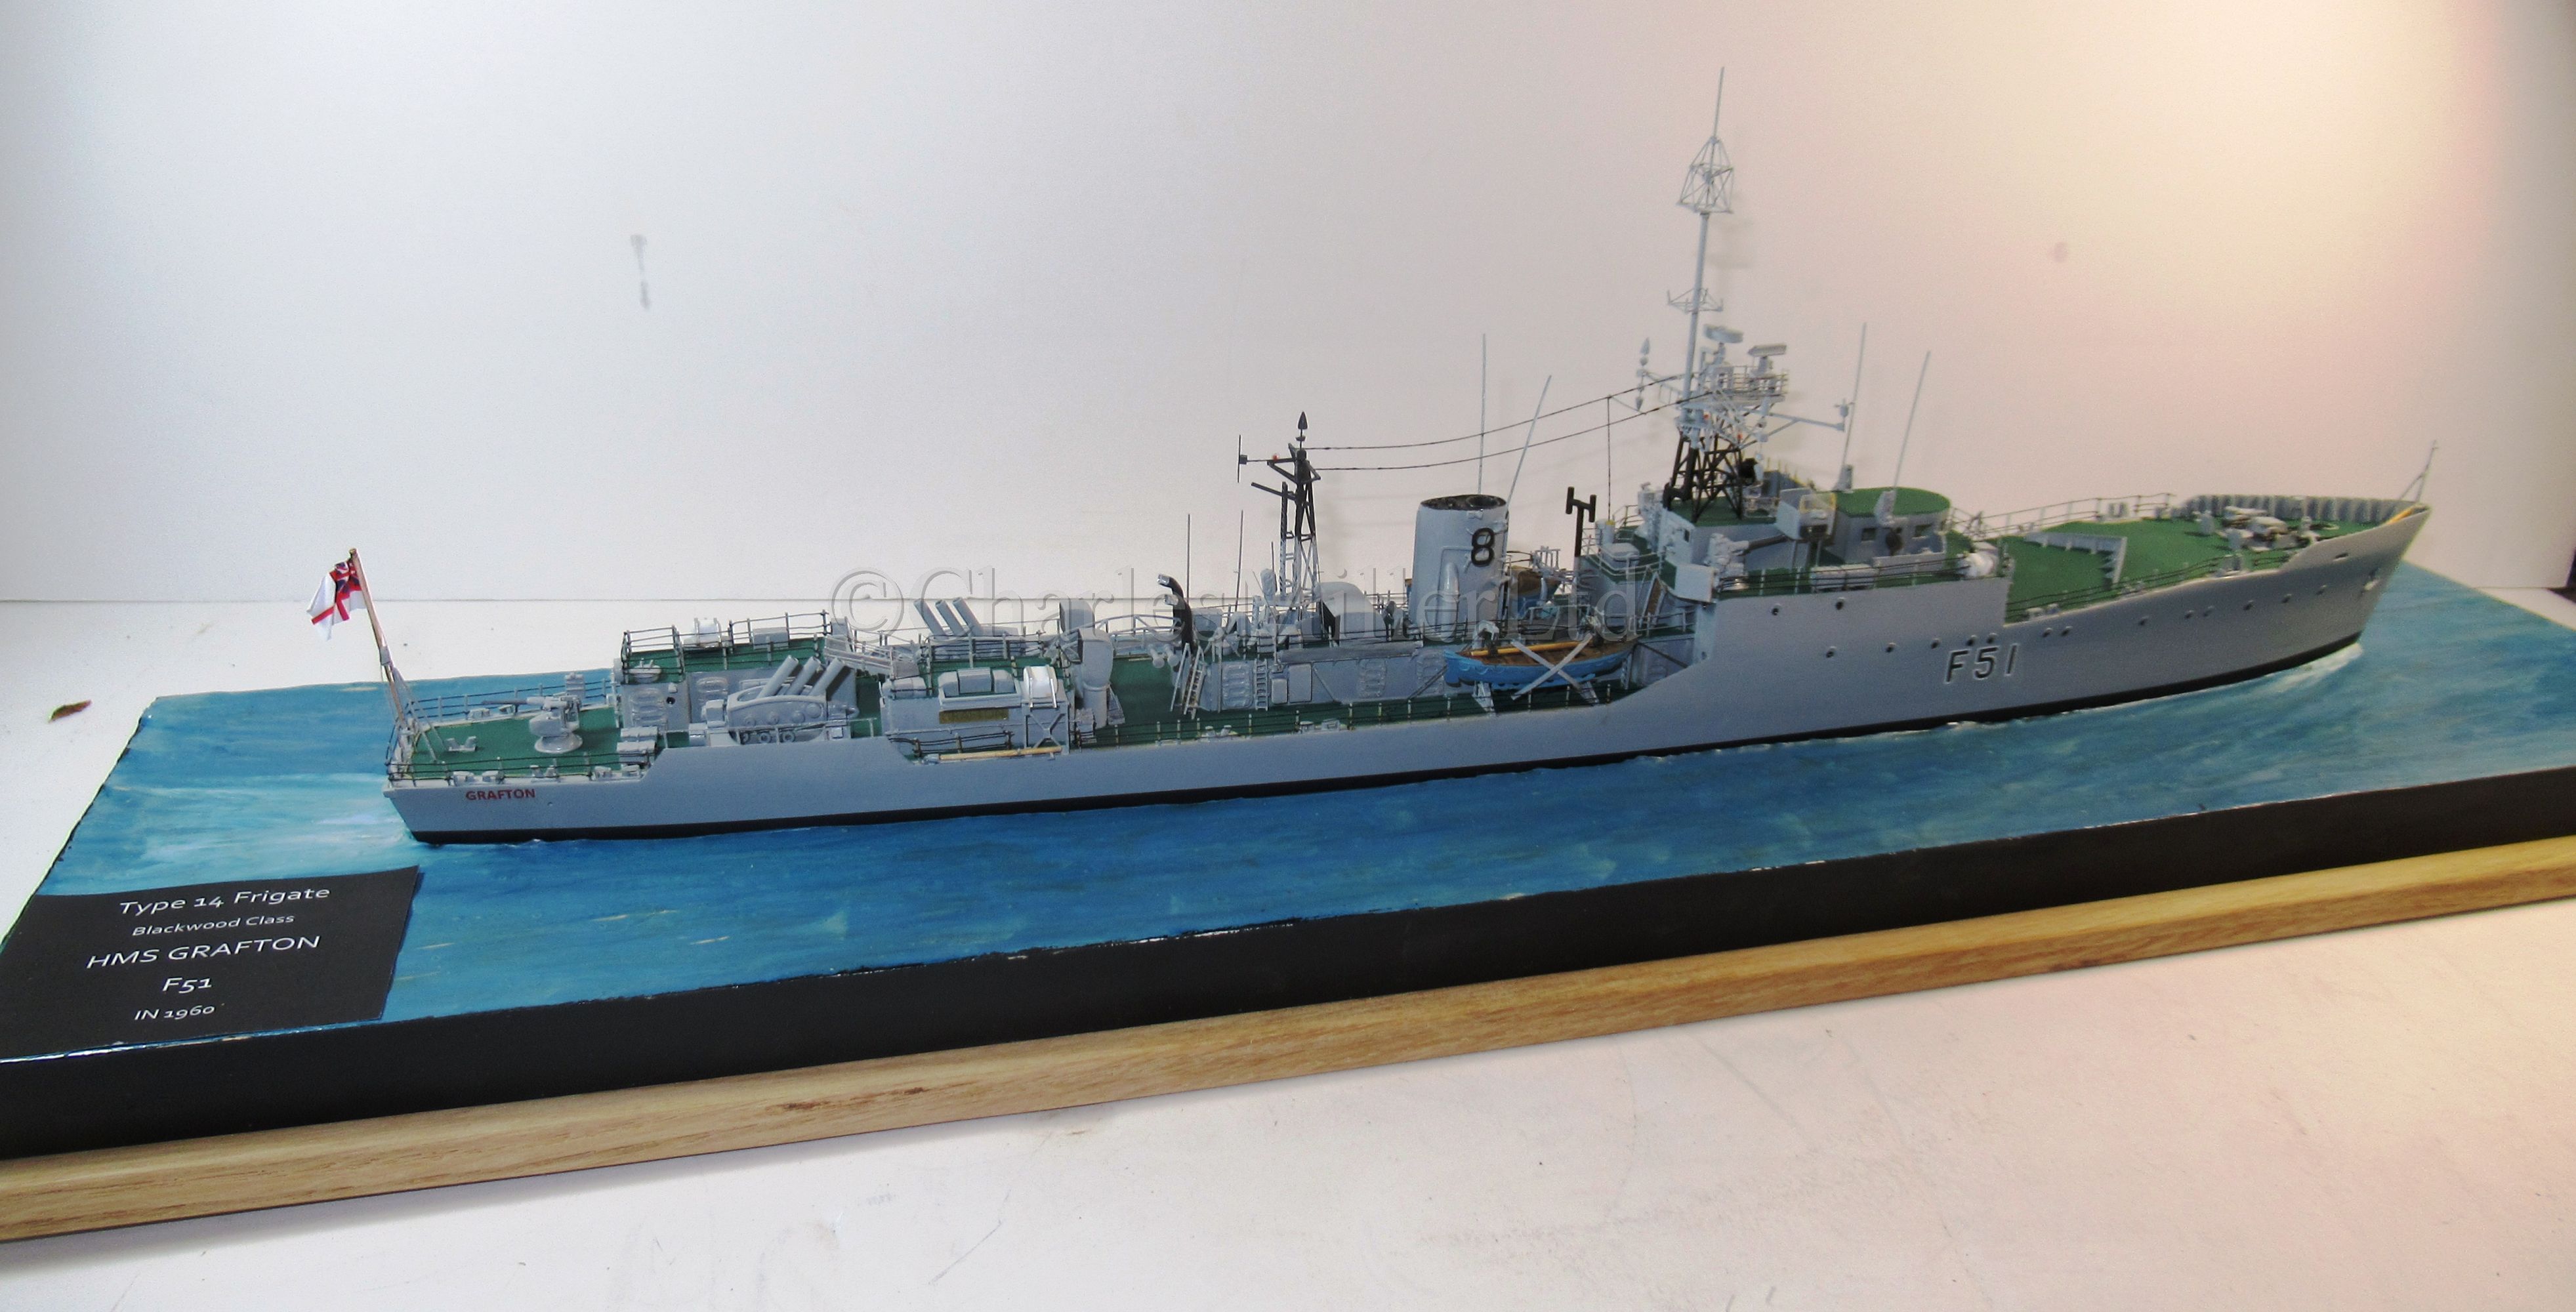 A 1:192 WATERLINE MODEL FOR THE TYPE 14 BLACKWOOD CLASS FRIGATE HMS GRAFTON (F51), AS FITTED IN - Image 3 of 14